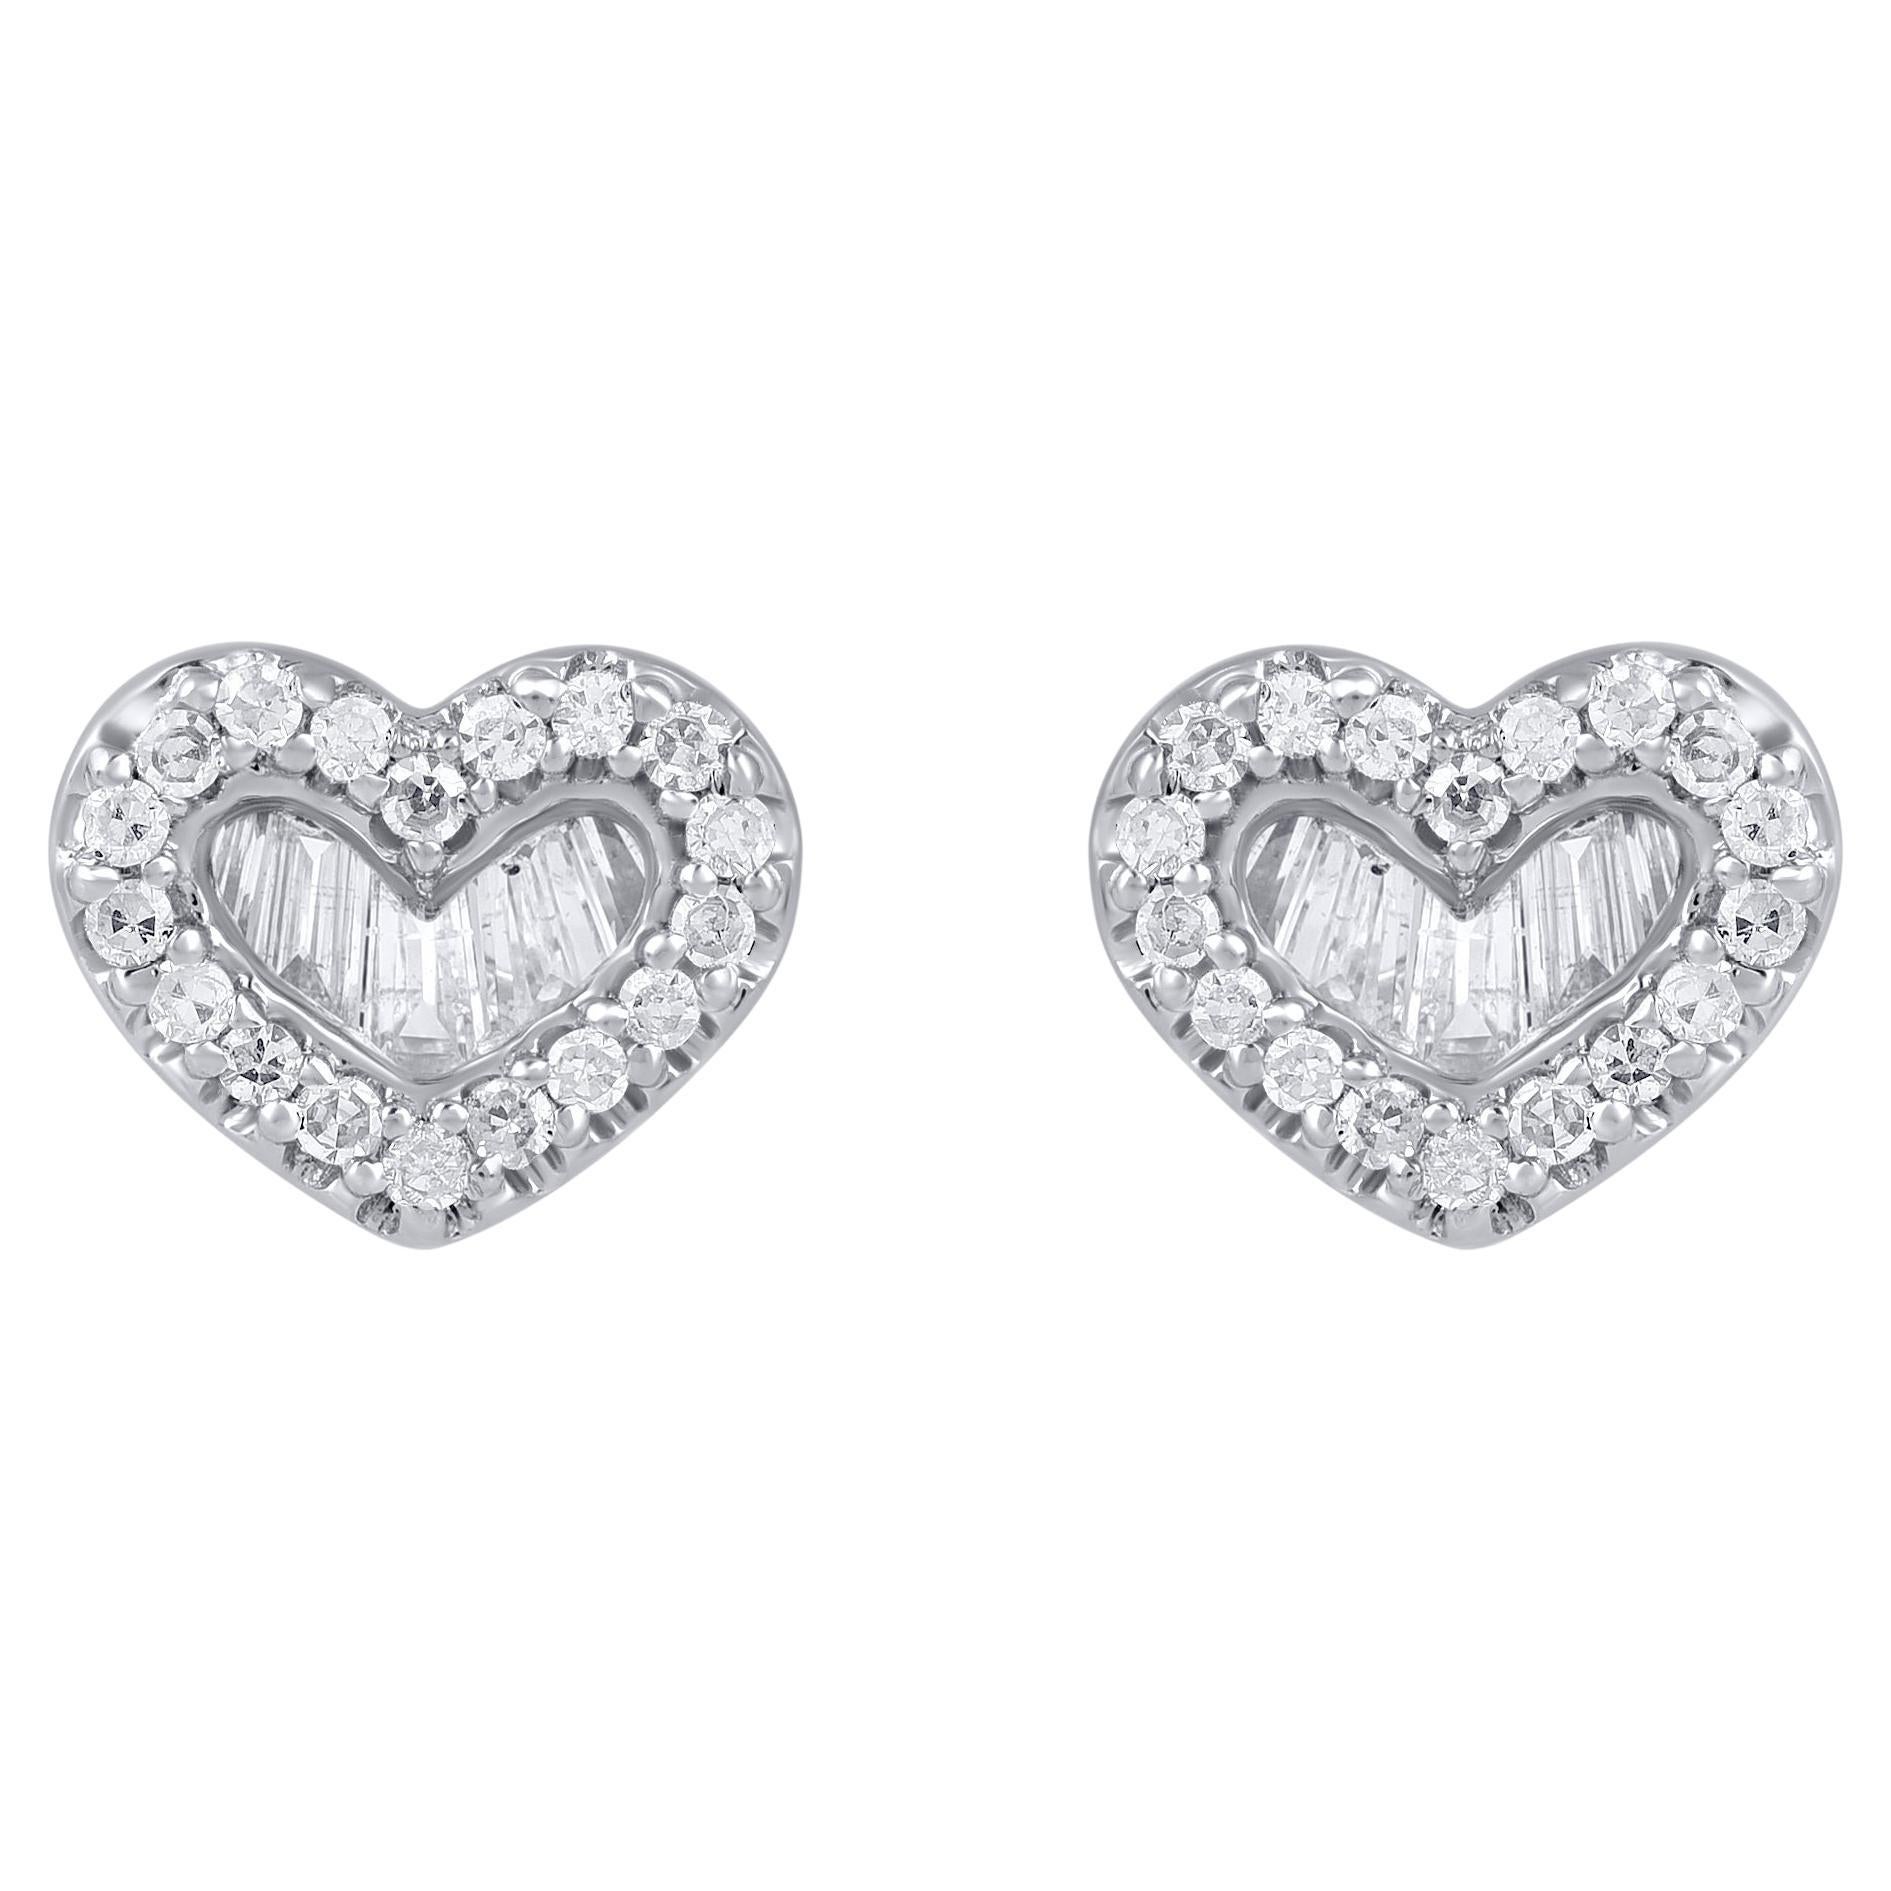 TJD 0.33 Carat Round and Baguette Diamond 14KT White Gold Heart Stud Earrings